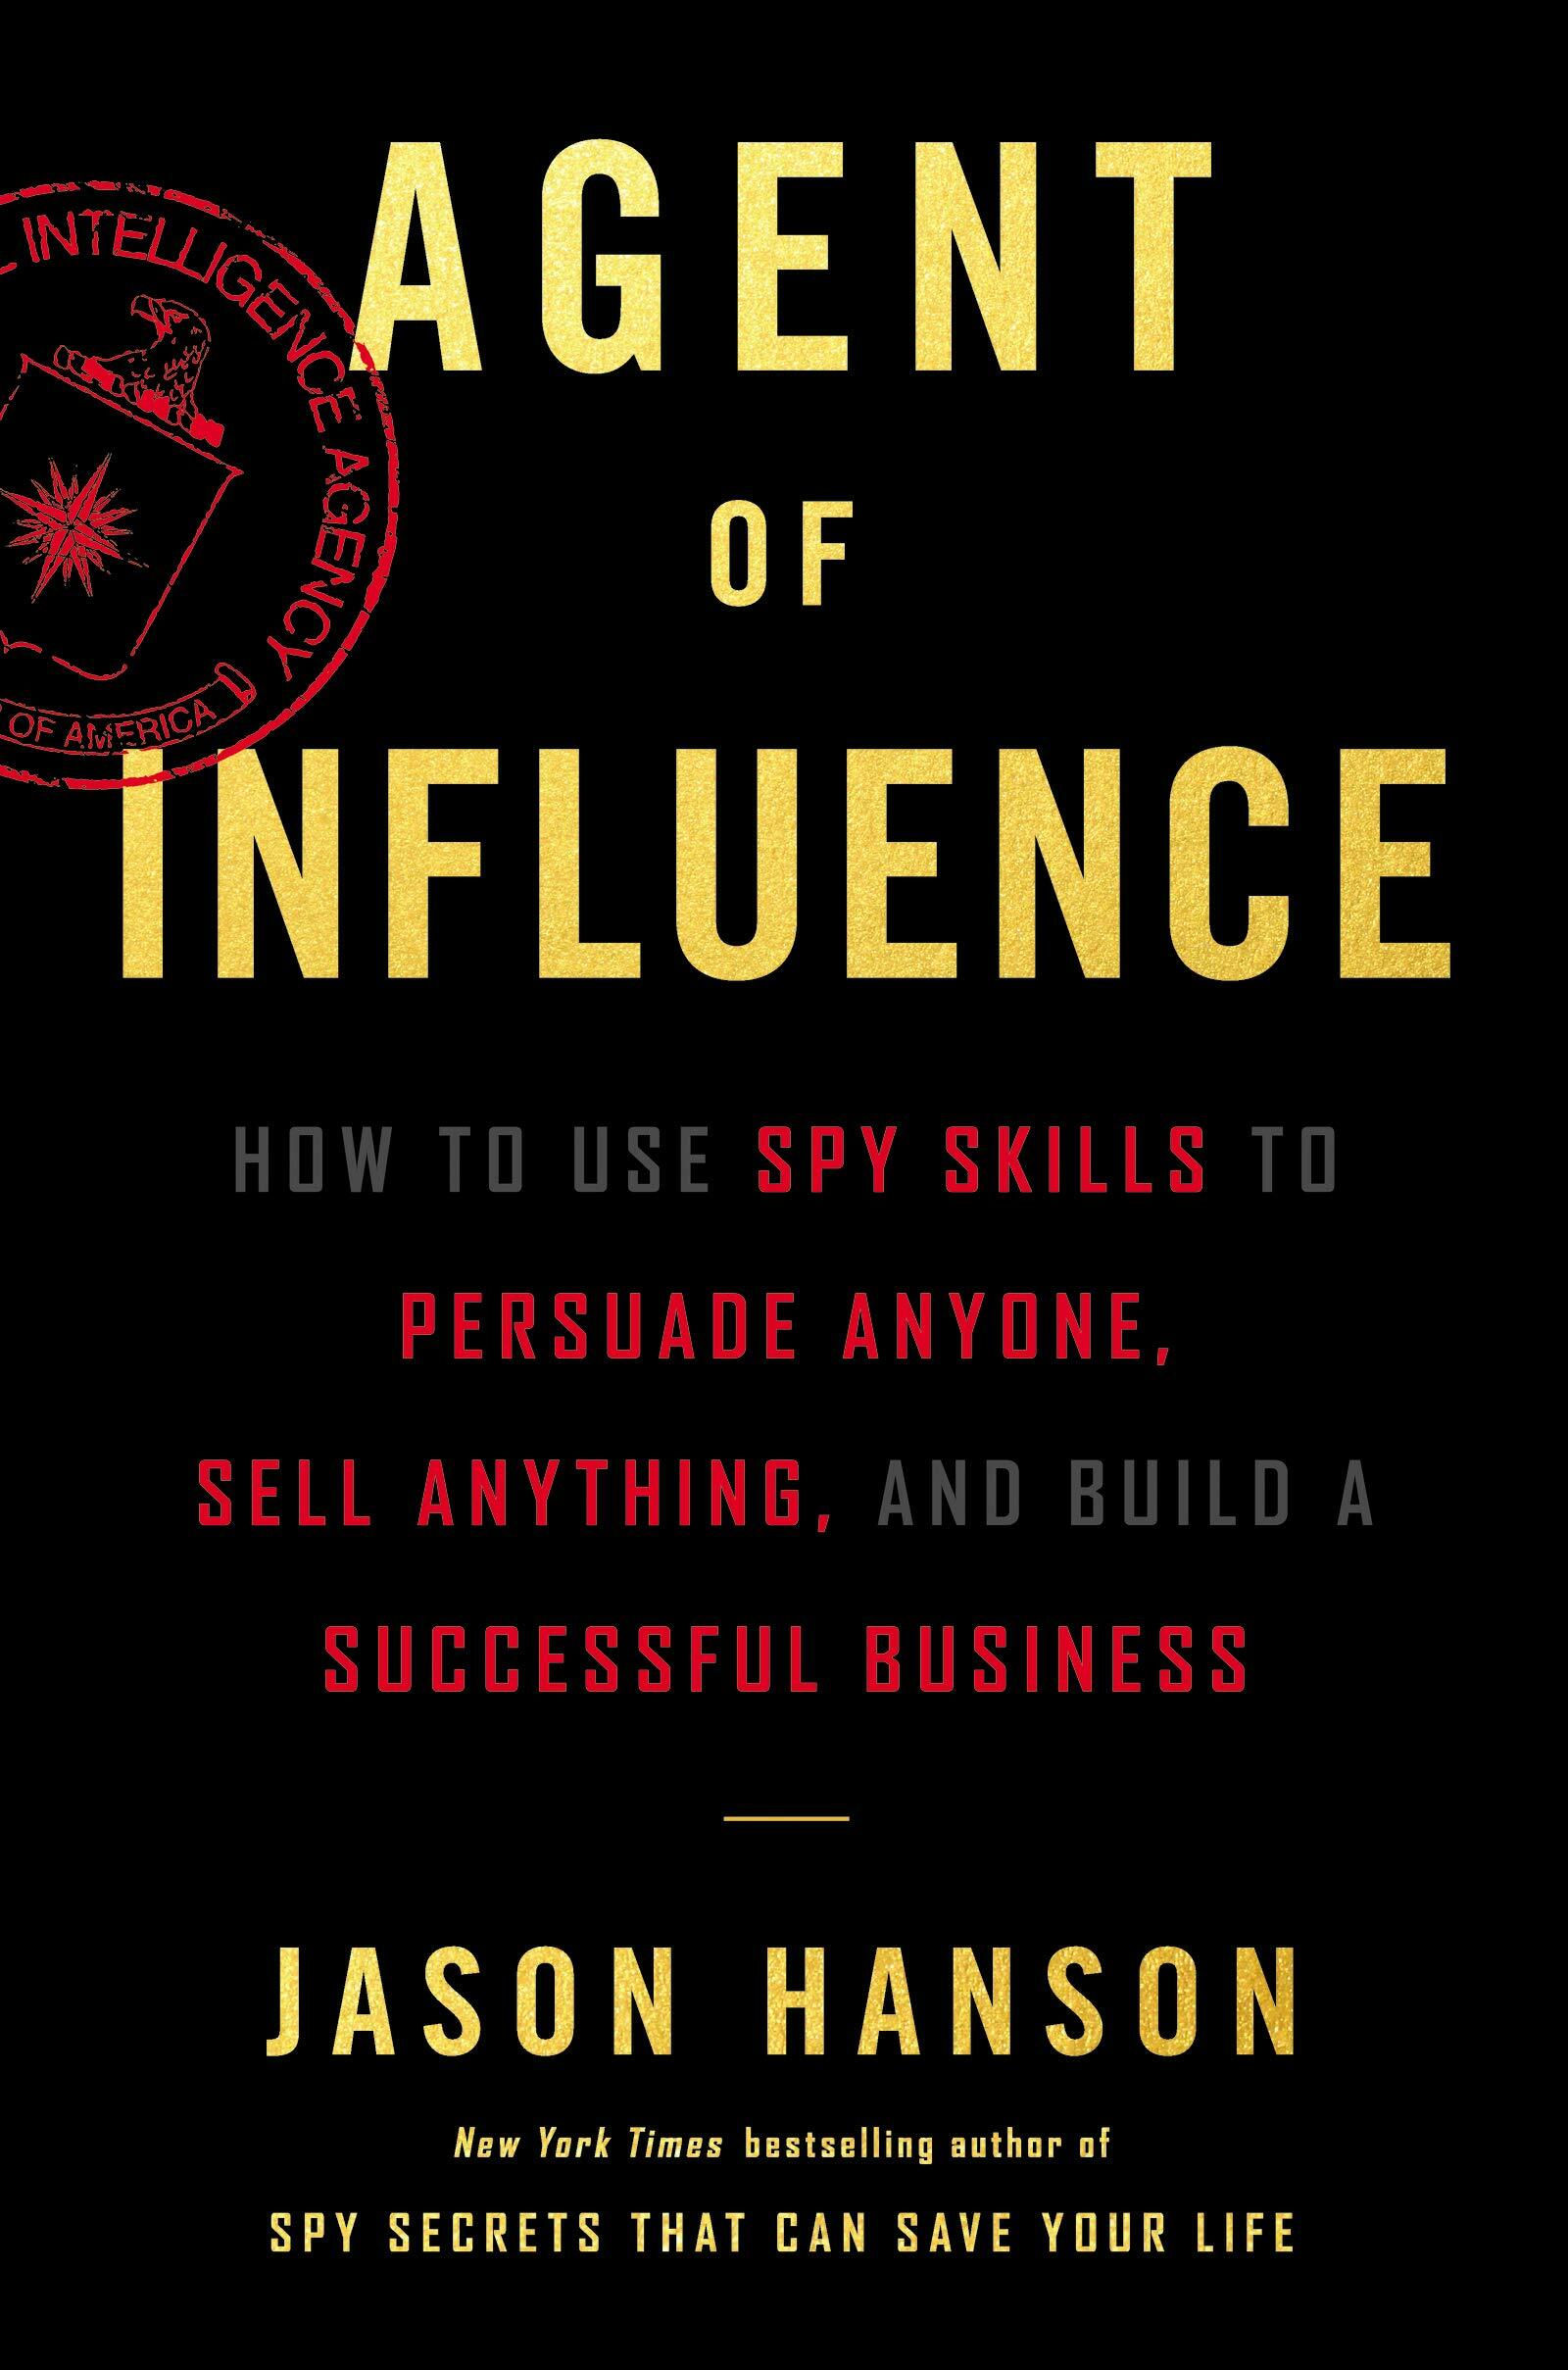 Agent of Influence: How to Use Spy Skills to Persuade Anyone, Sell Anything, and Build a Successful Business (Hardcover)